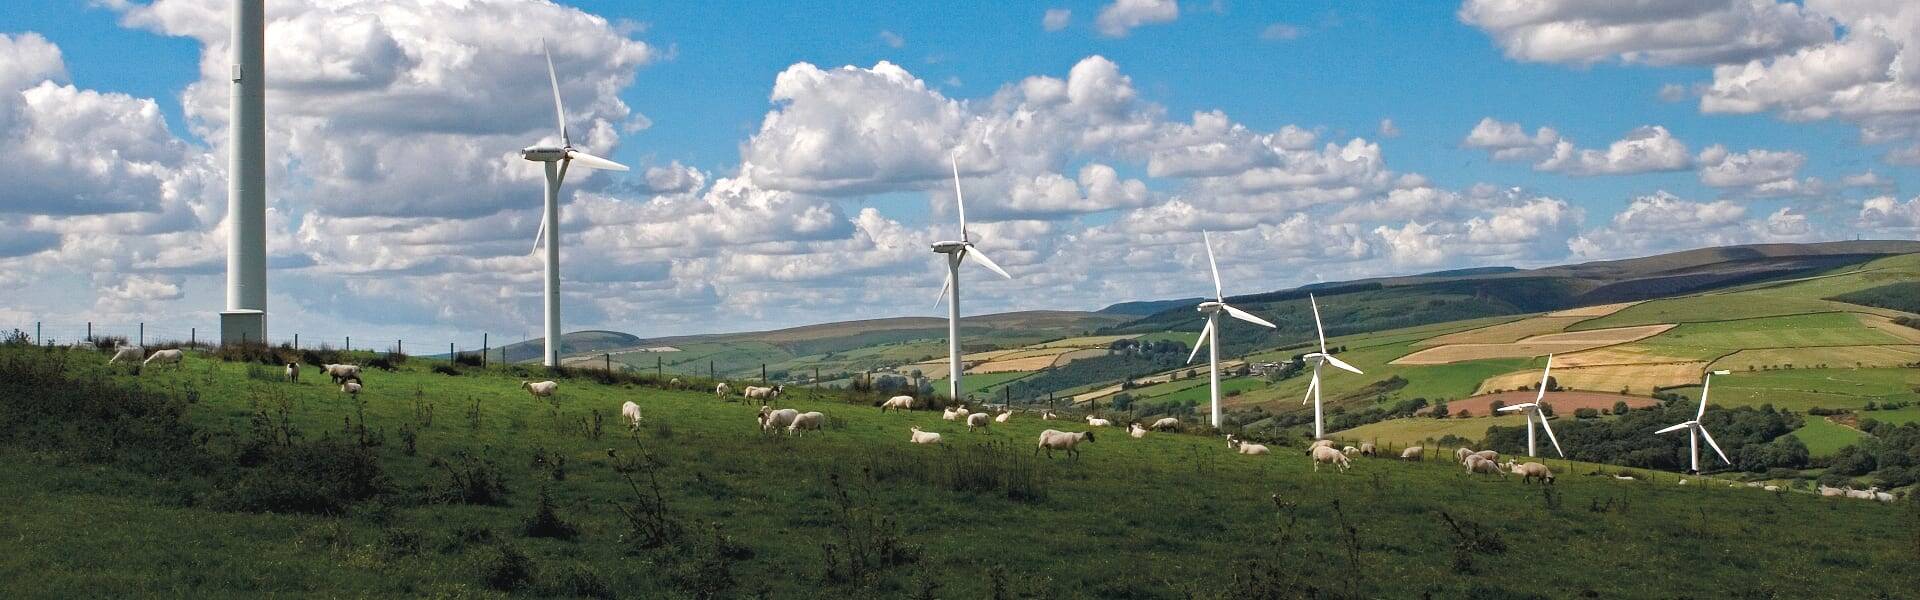 BEIS Committee calls for rethink of onshore wind planning